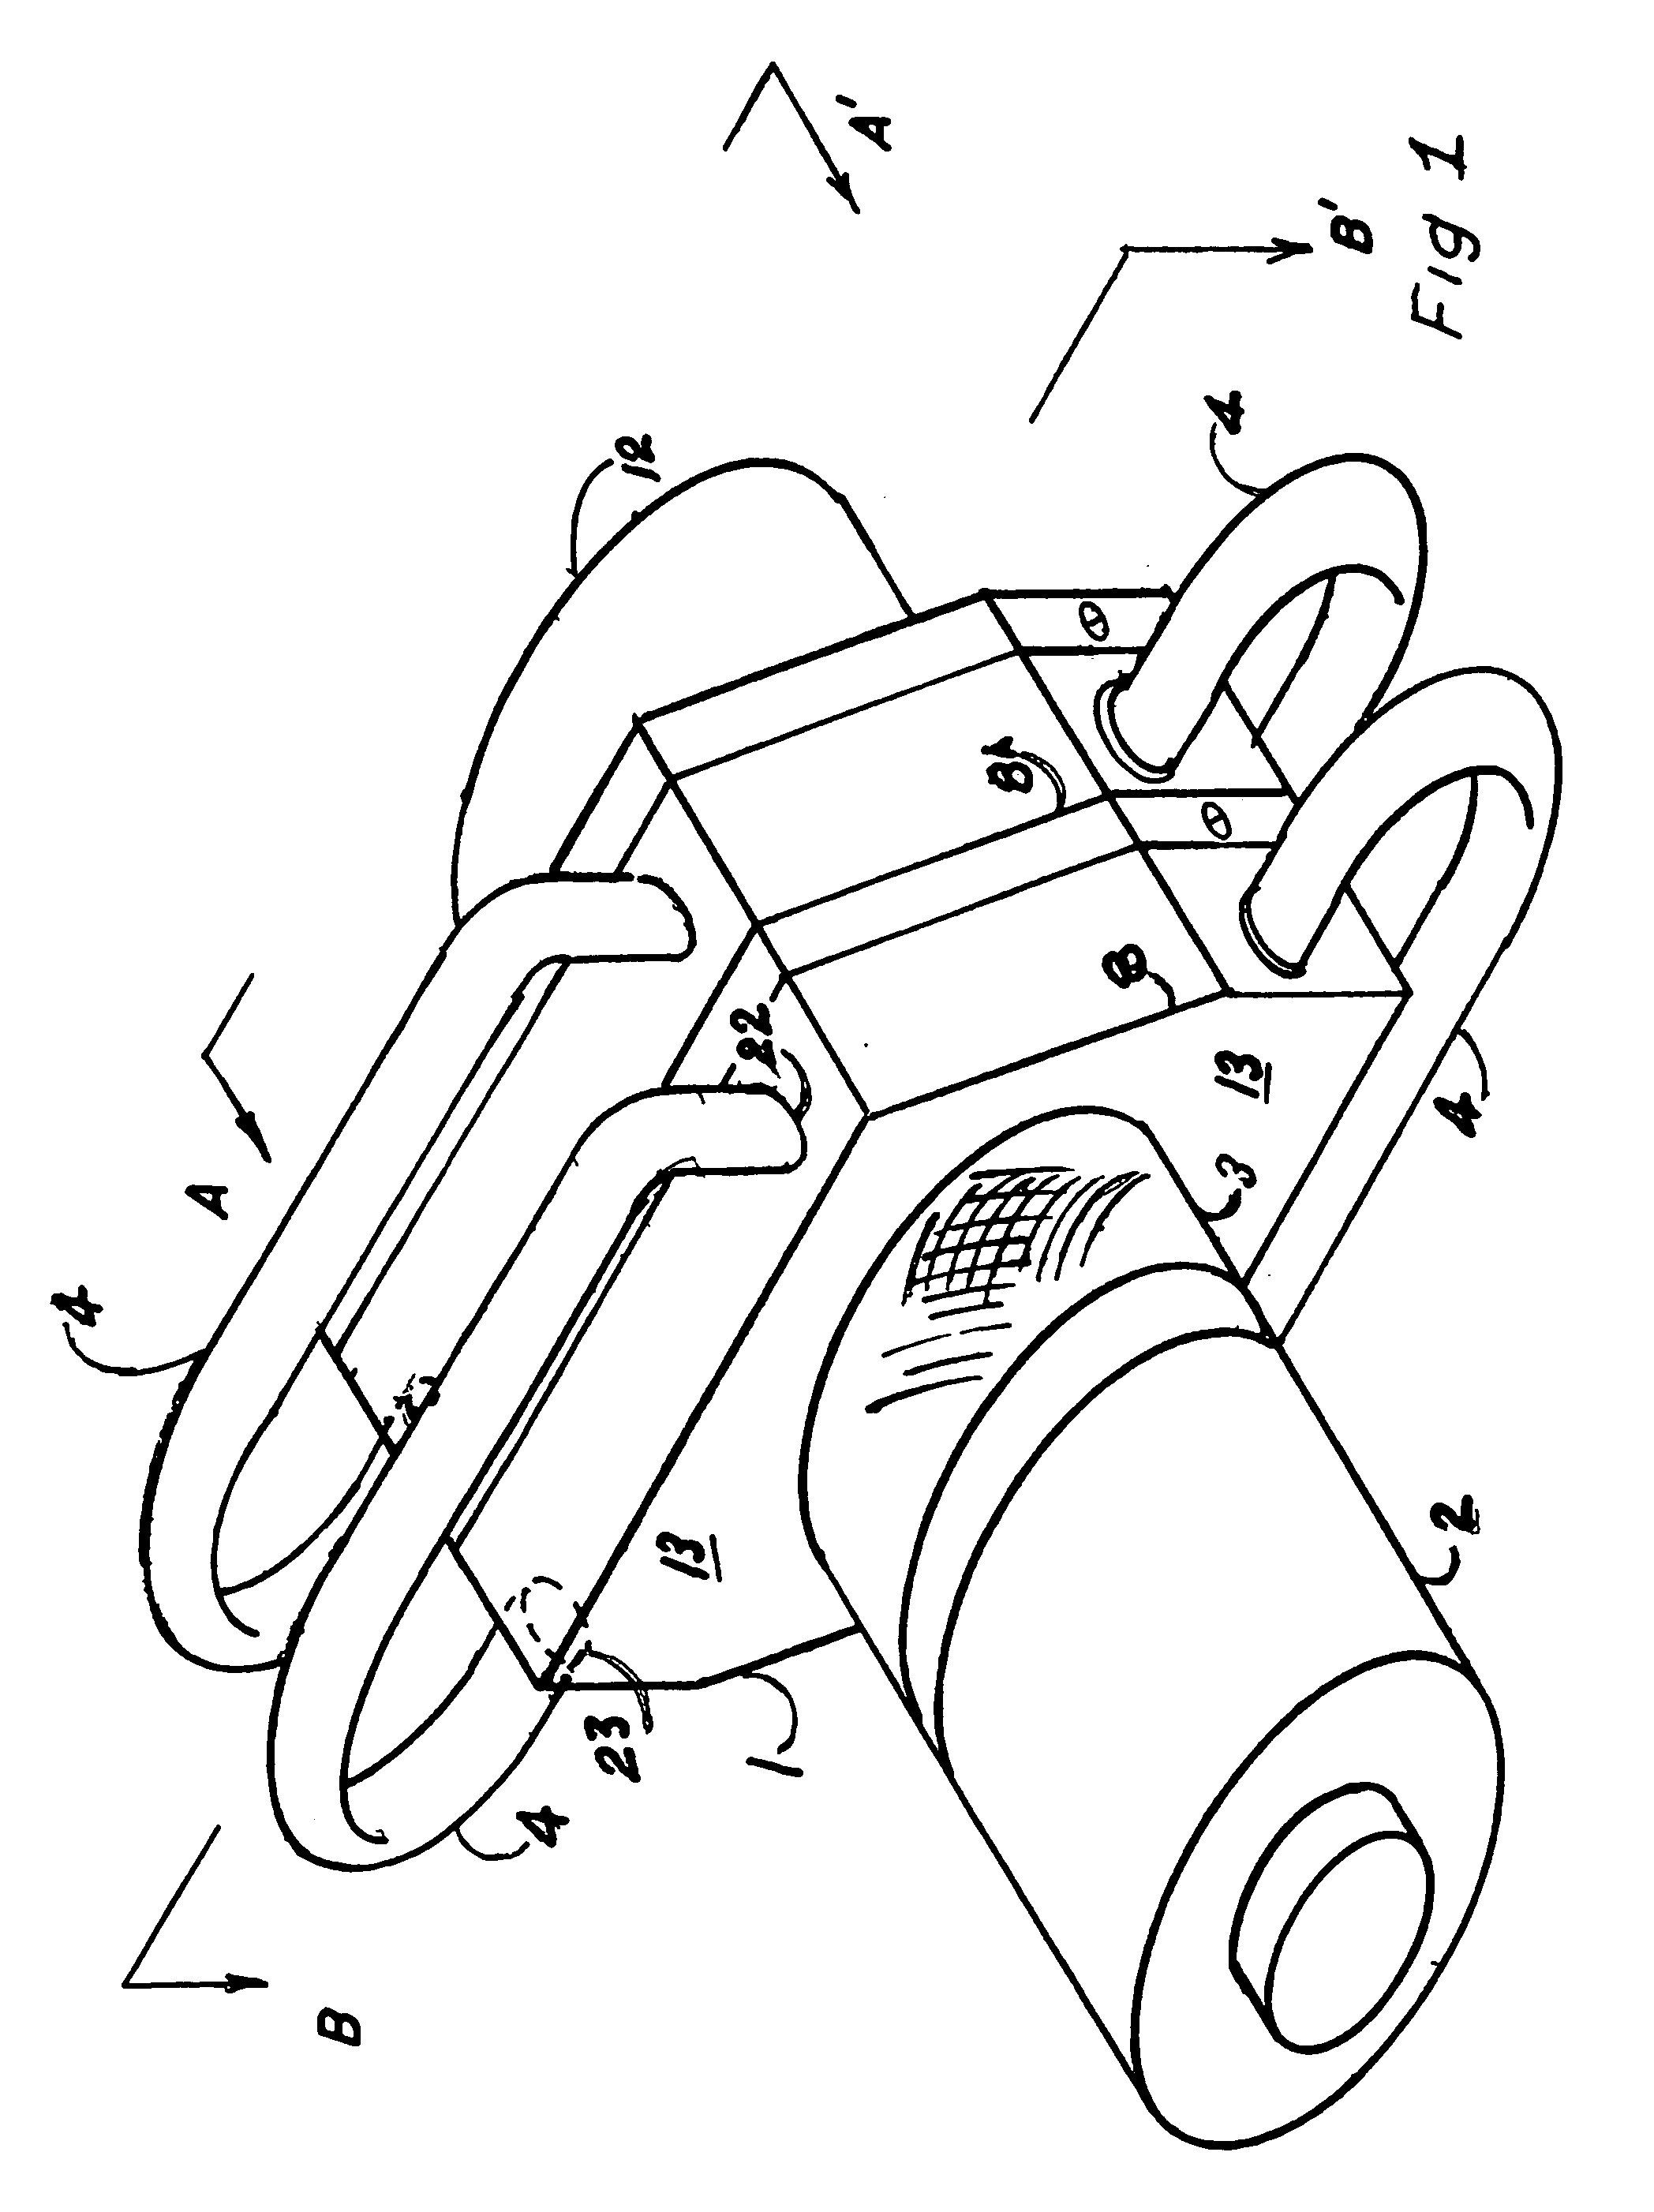 Apparatus and method for processing fluids